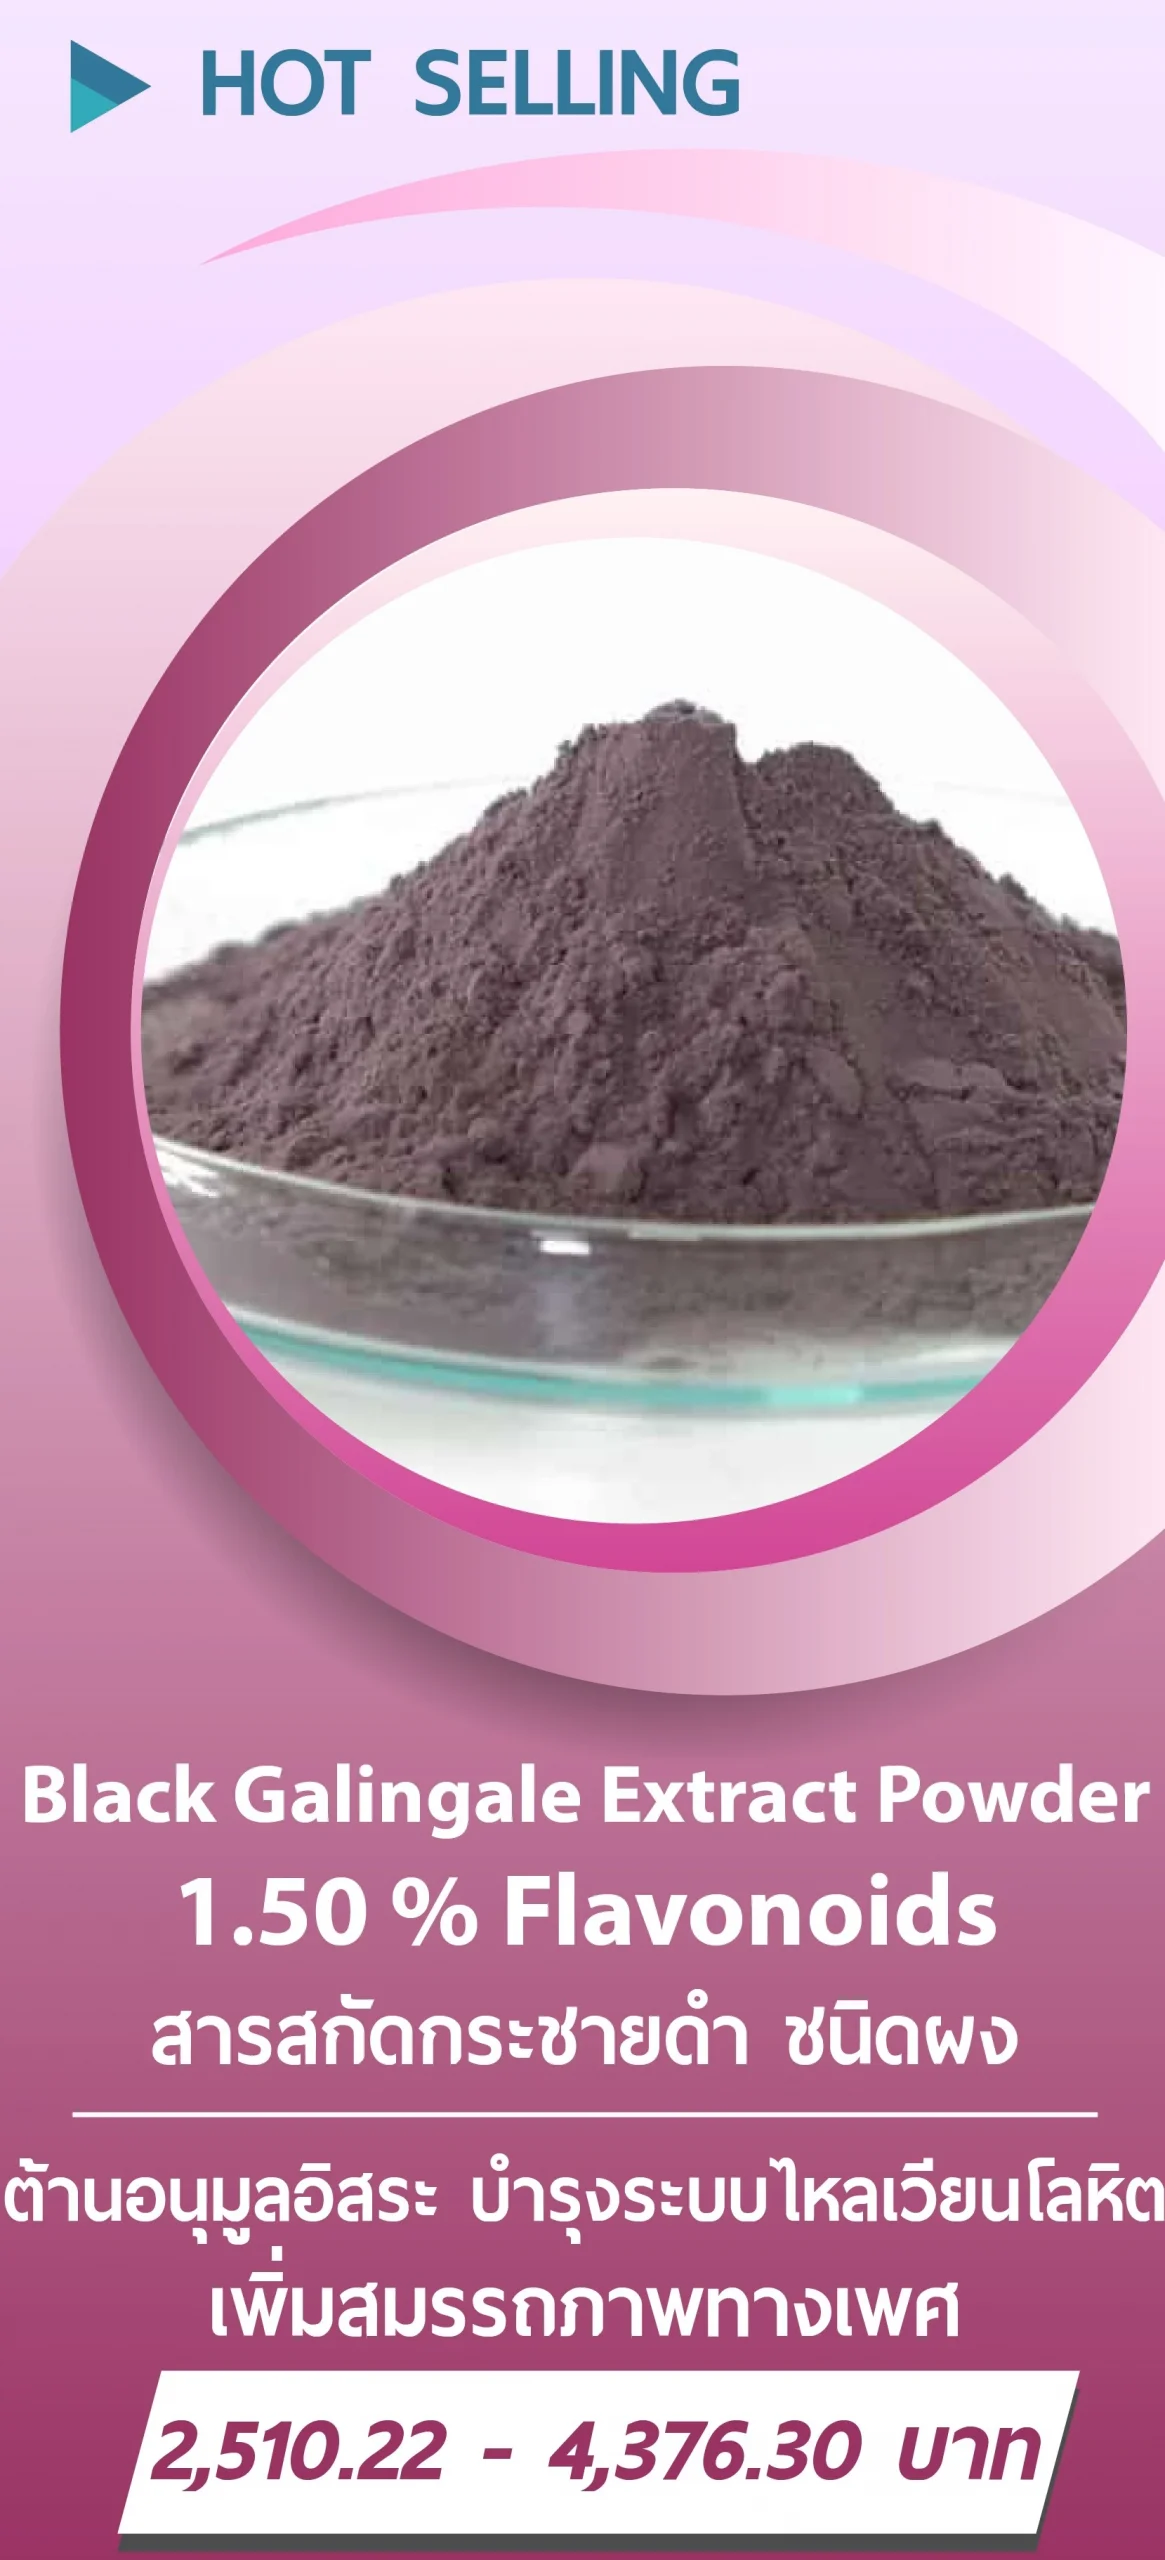 Homepage_Banner_Black-Galingale-Extract-Powder-1.50_-Flavonoids